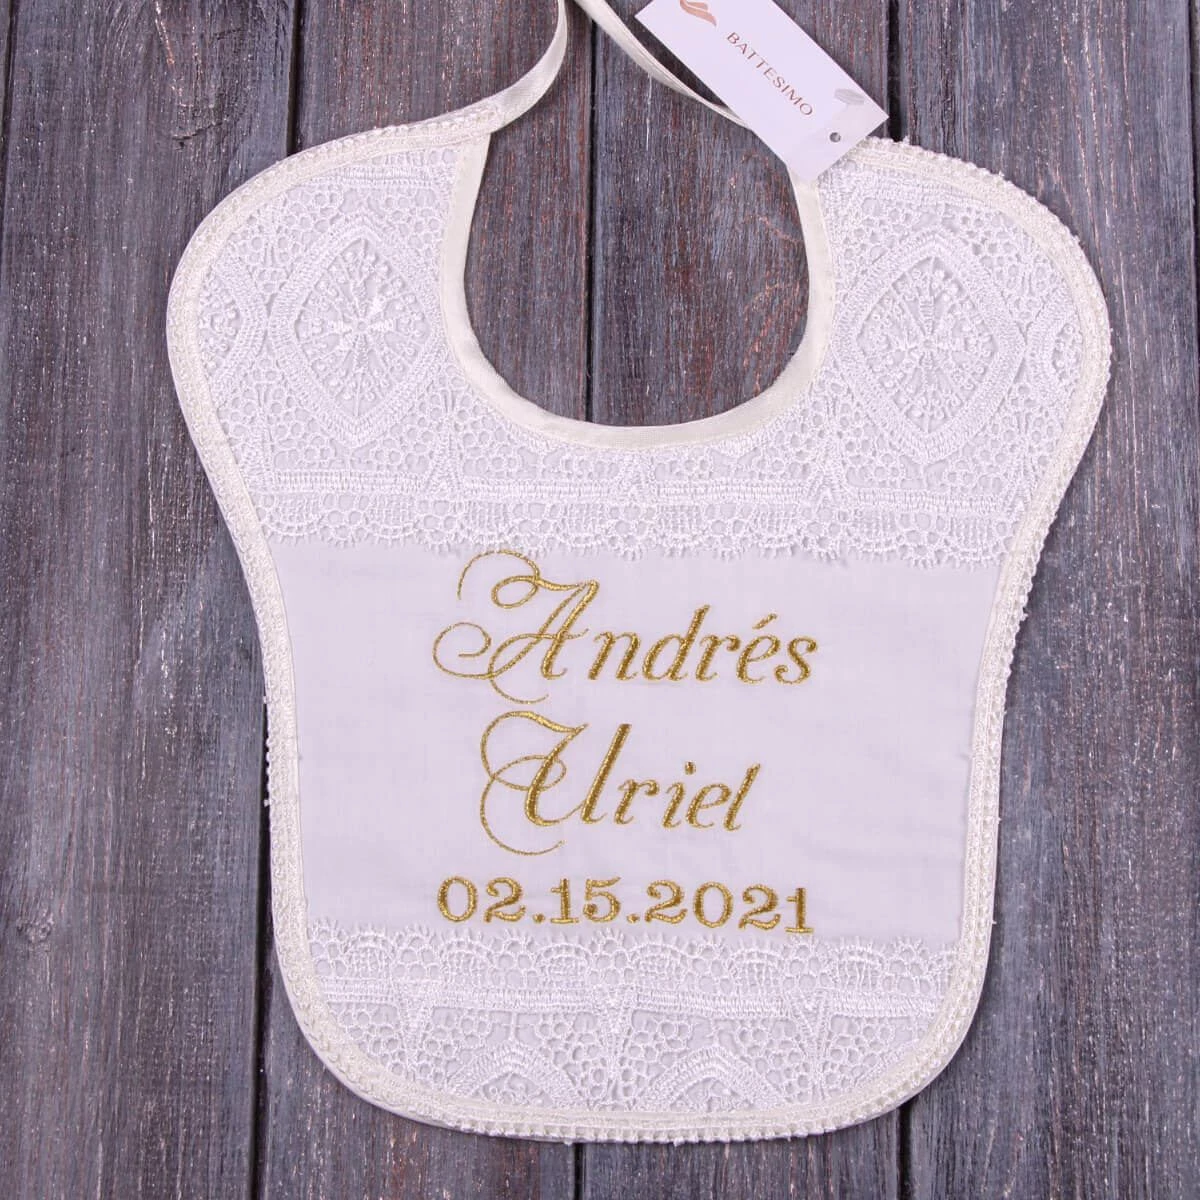 Personalized Baby Bibs for every Little... hero image